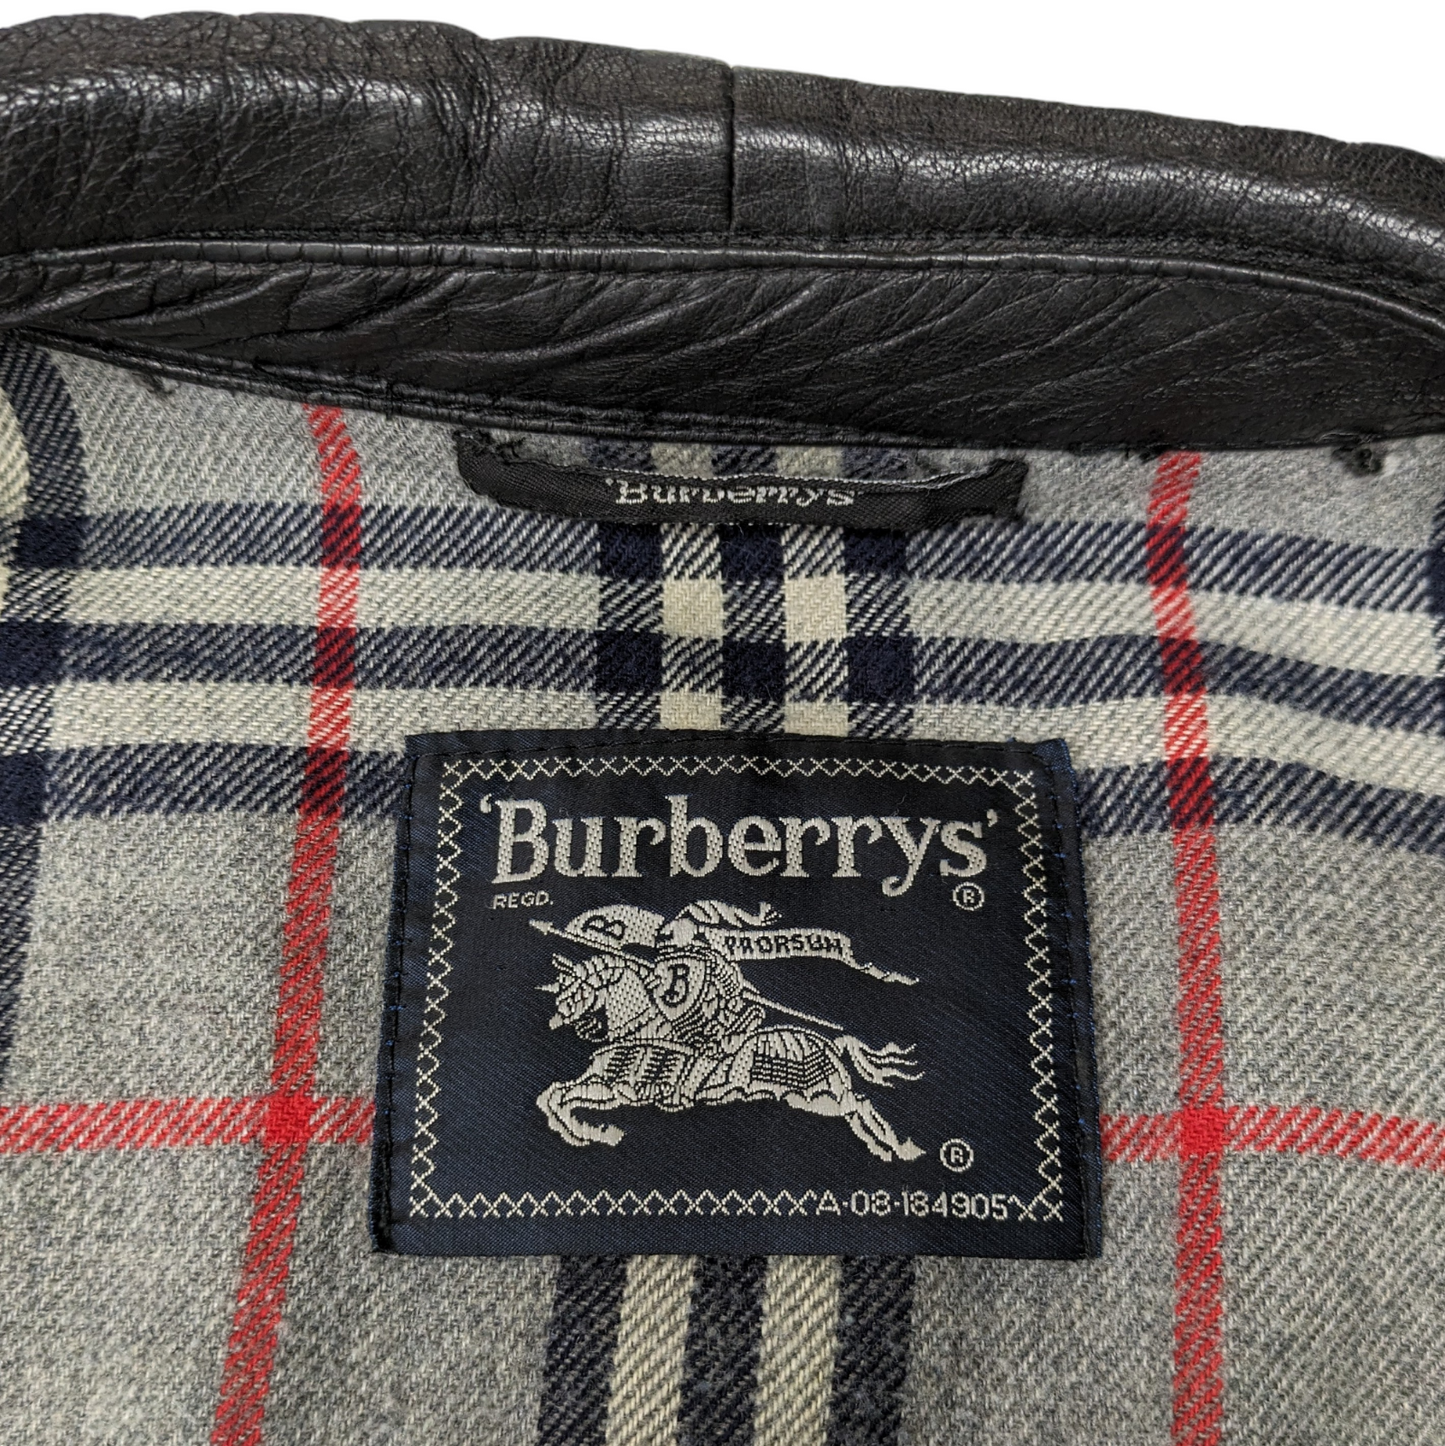 80s Burberry Lined Leather Jacket Size M